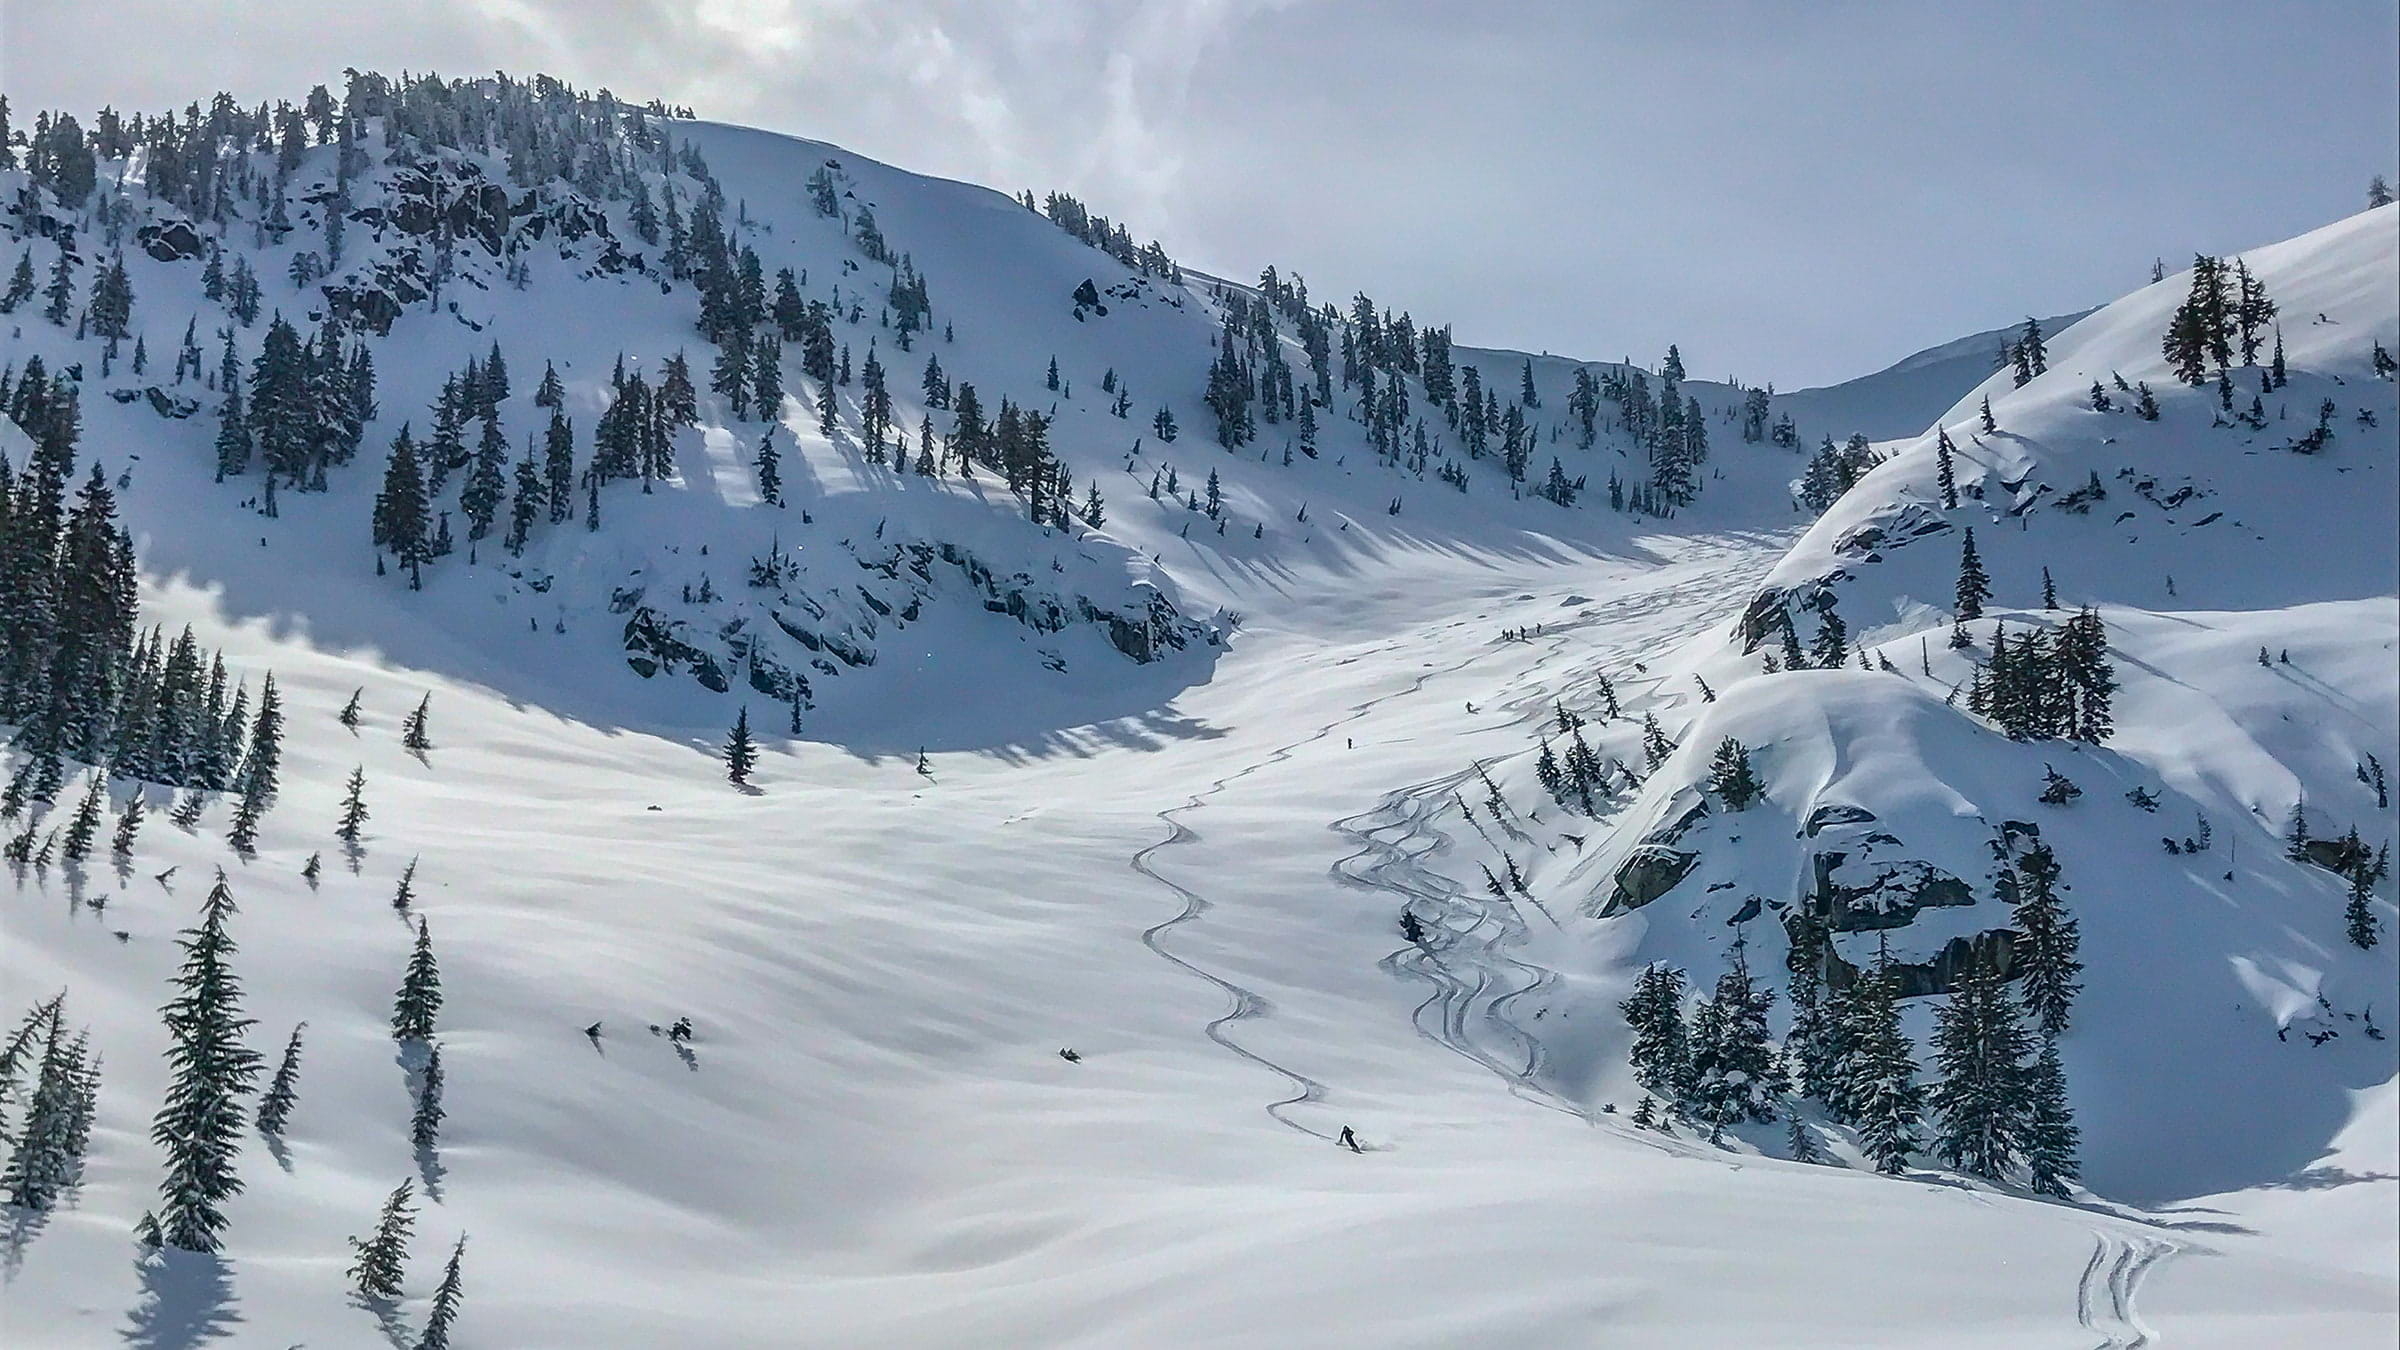 A backcountry skier in a wide open bowl with Alpenglow Expeditions based out of Palisades Tahoe